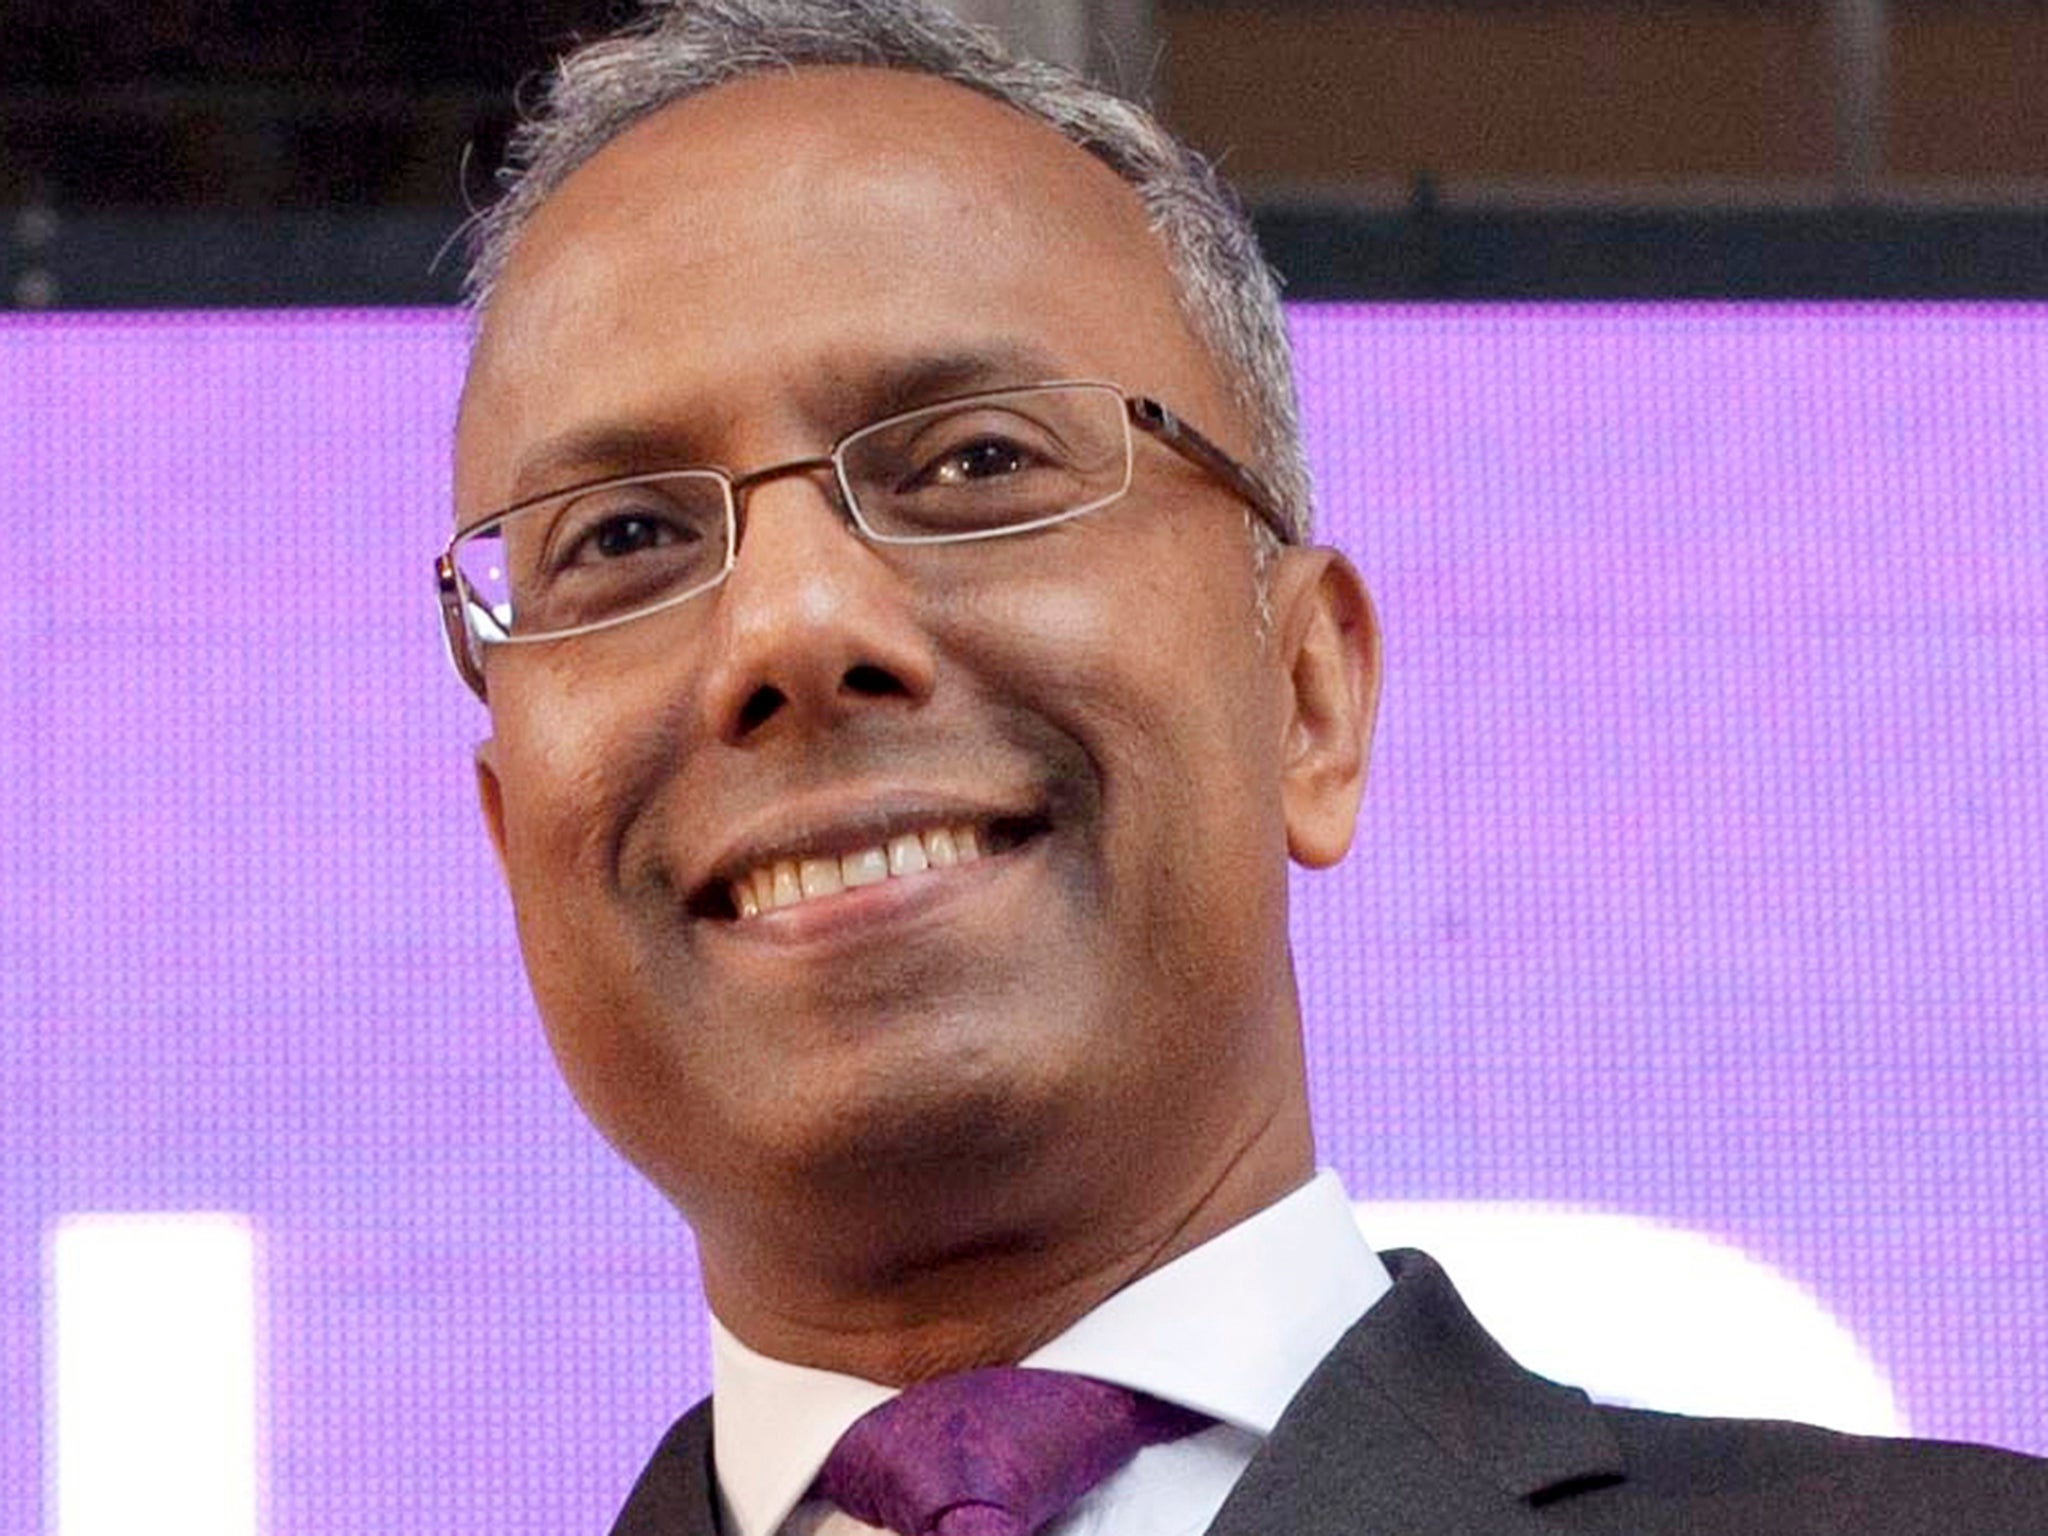 Mr Rahman - who was the directly-elected mayor of Tower Hamlets in east London - wants to mount a High Court challenge to a ruling by Election Commissioner Richard Mawrey.